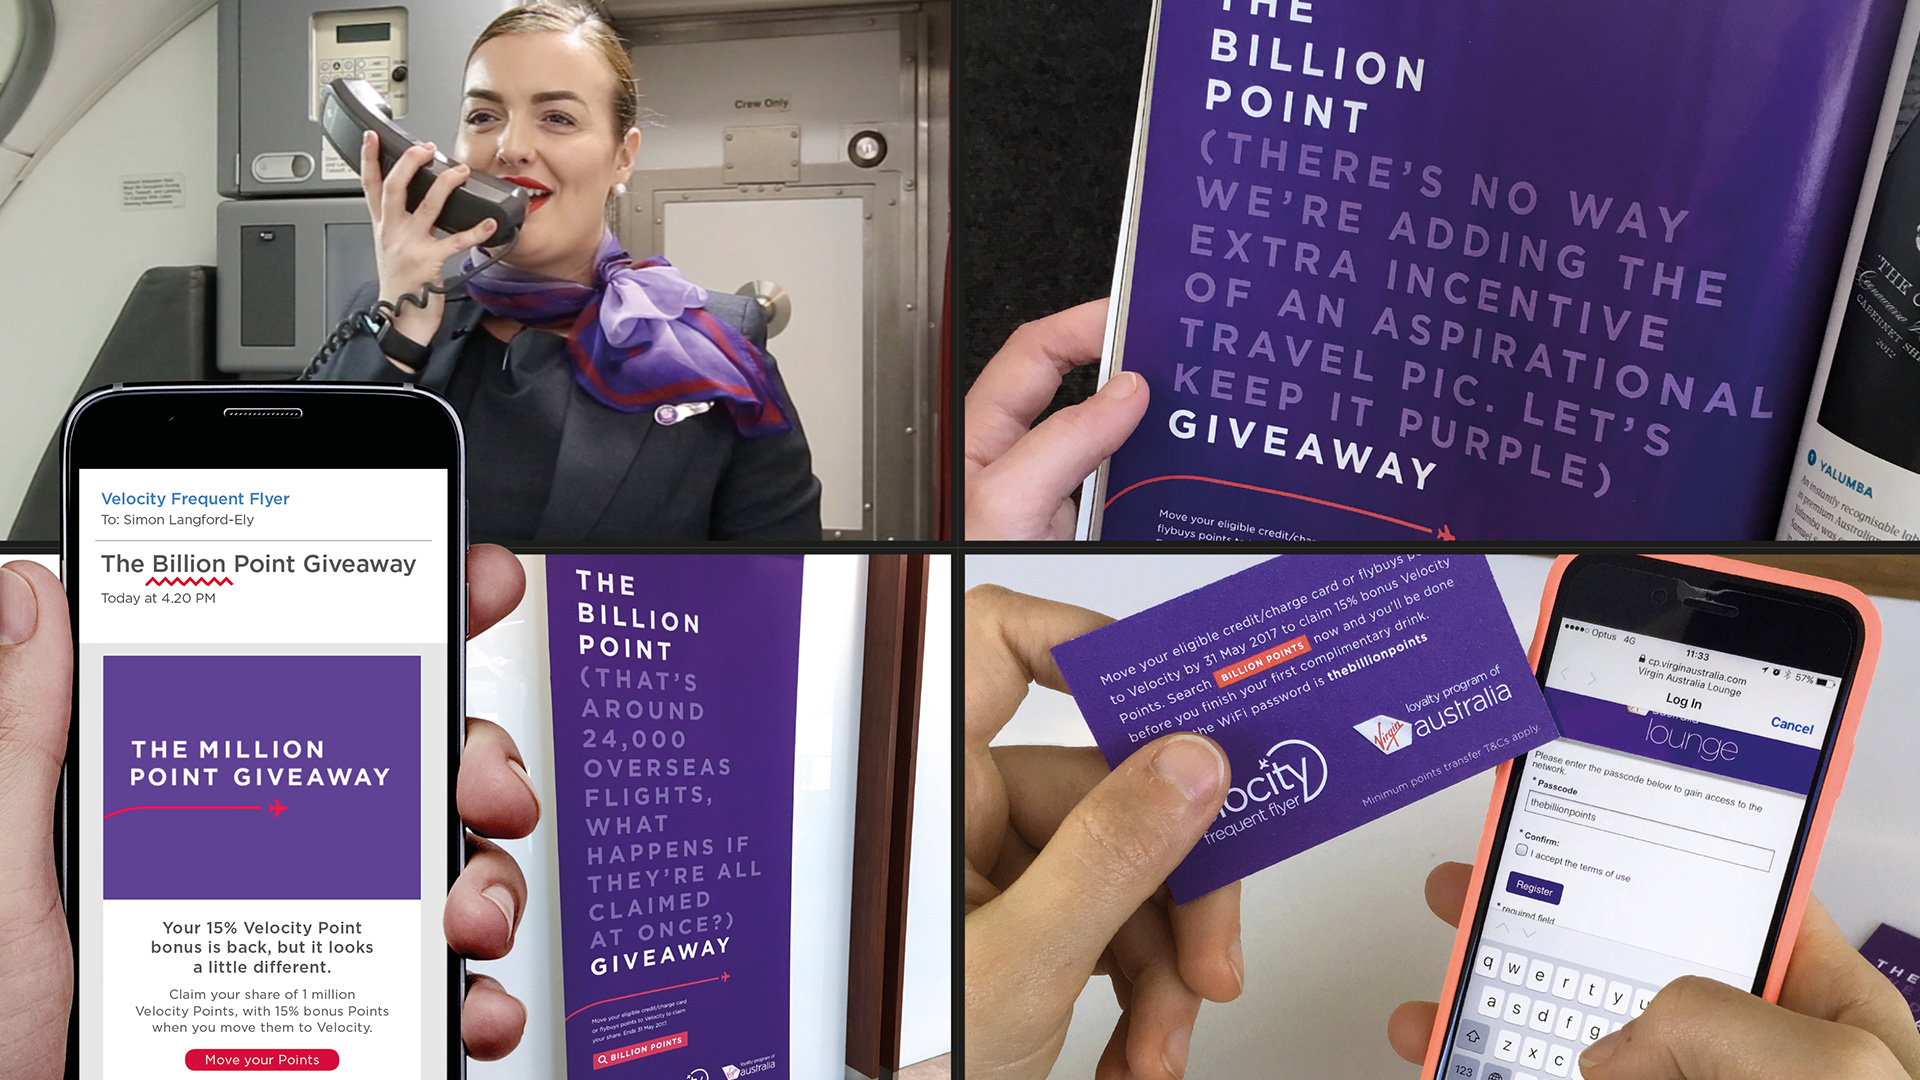 The Billion Point Giveaway